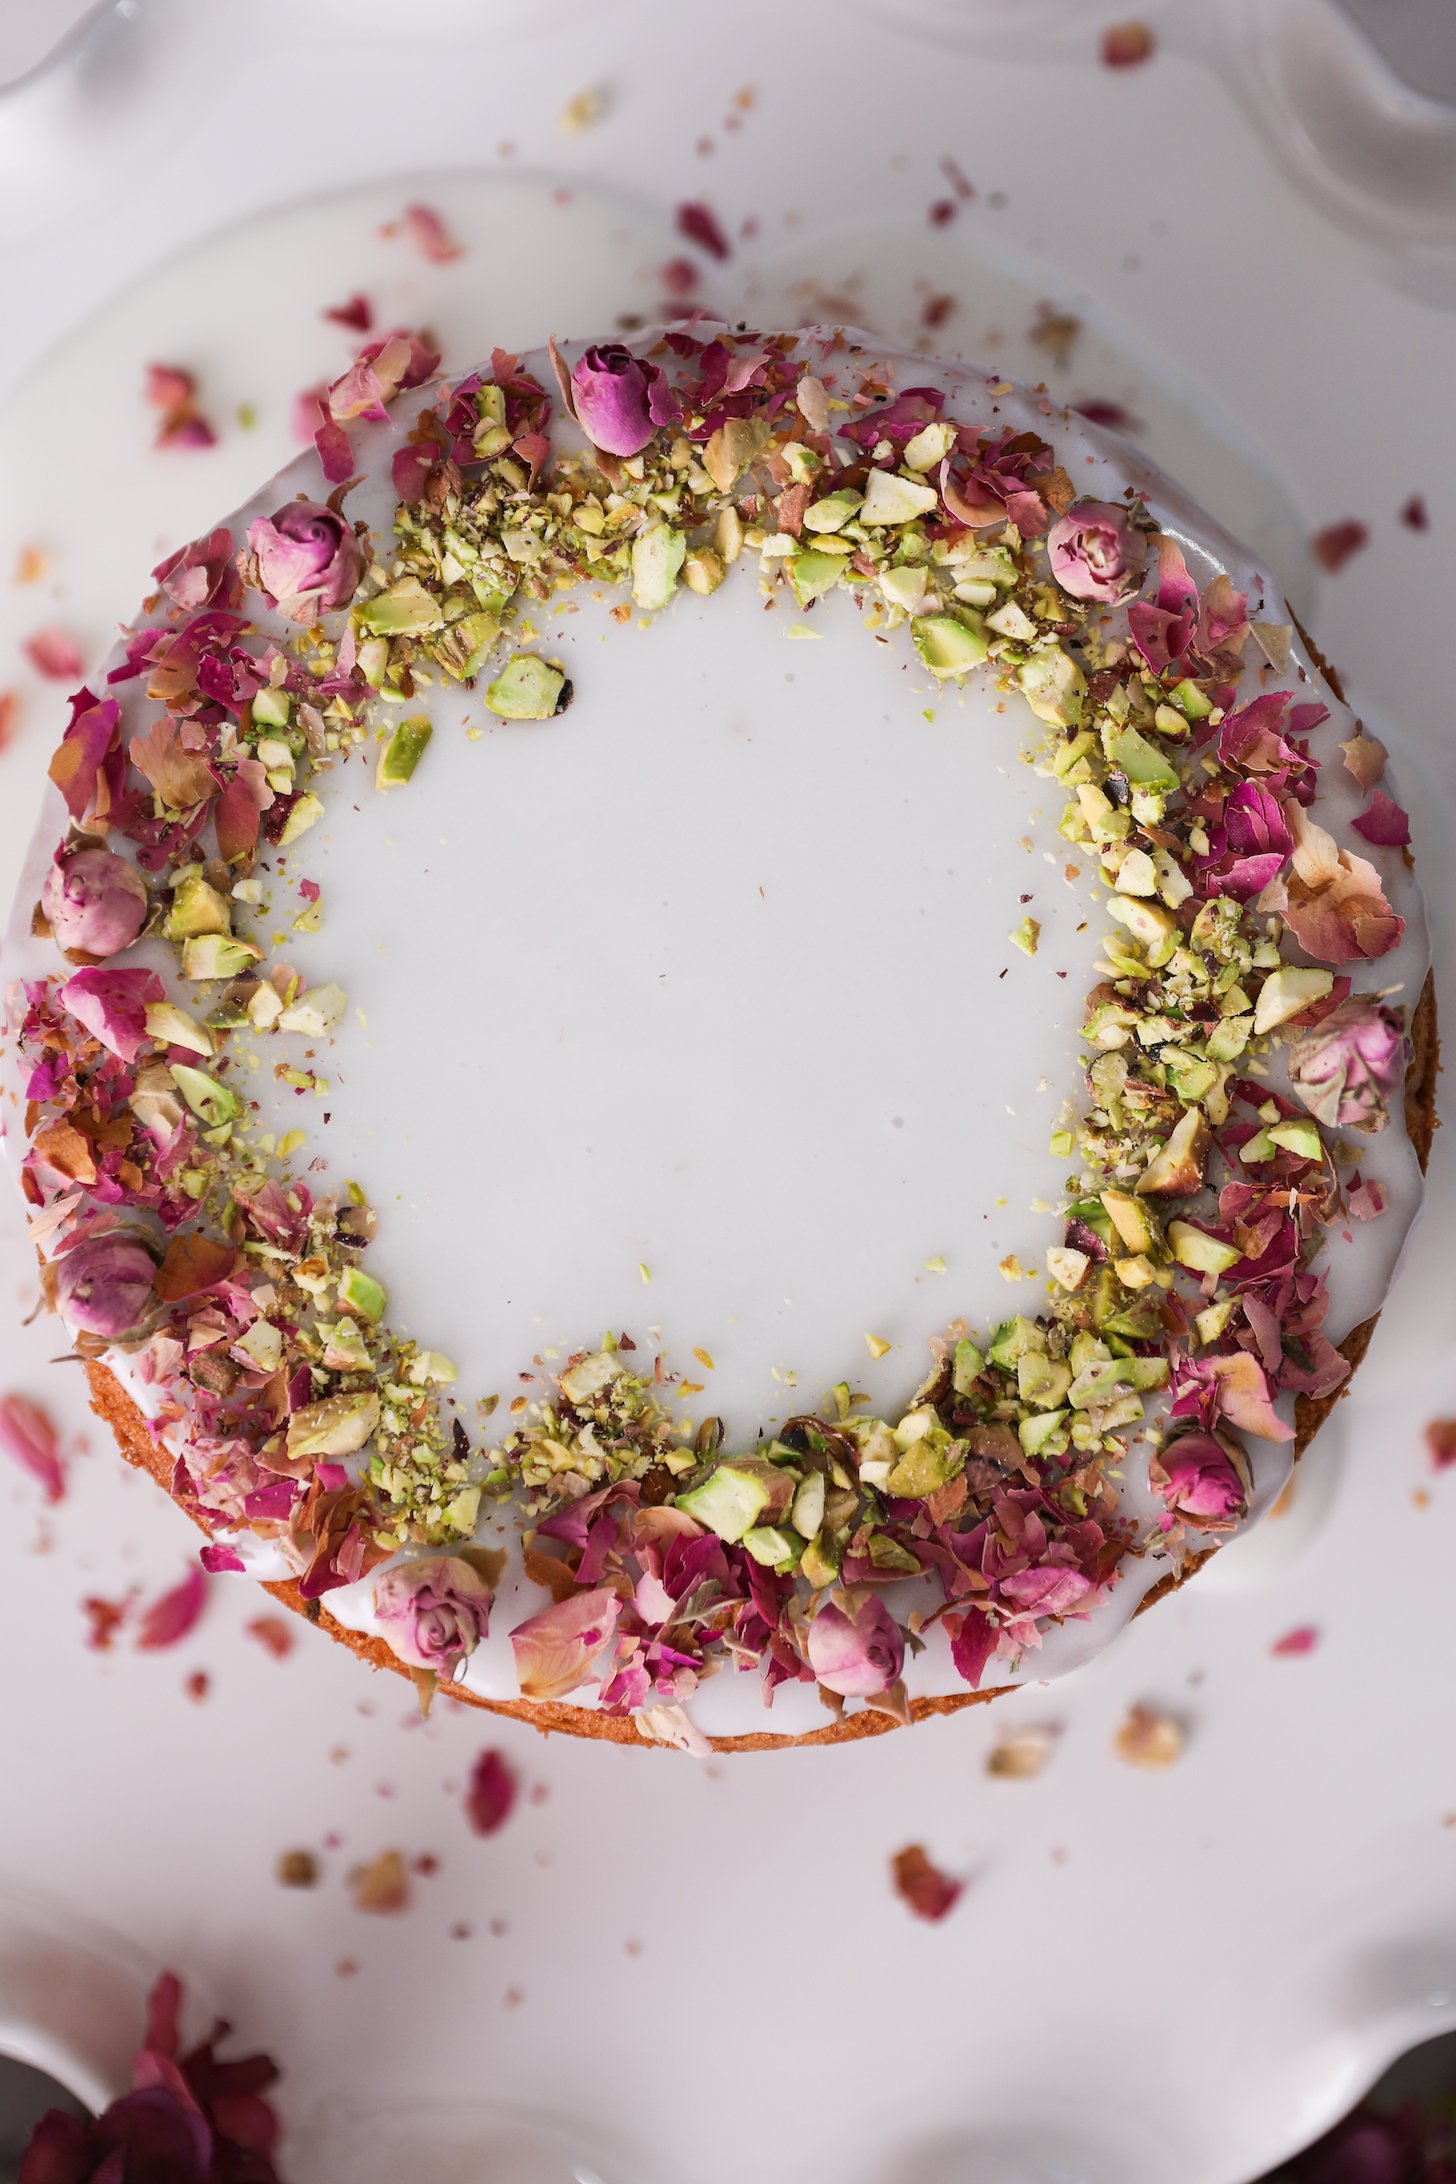 A white cake stand holds a round cake topped with smooth white icing with a boarder of red roses and crushed pistachios.